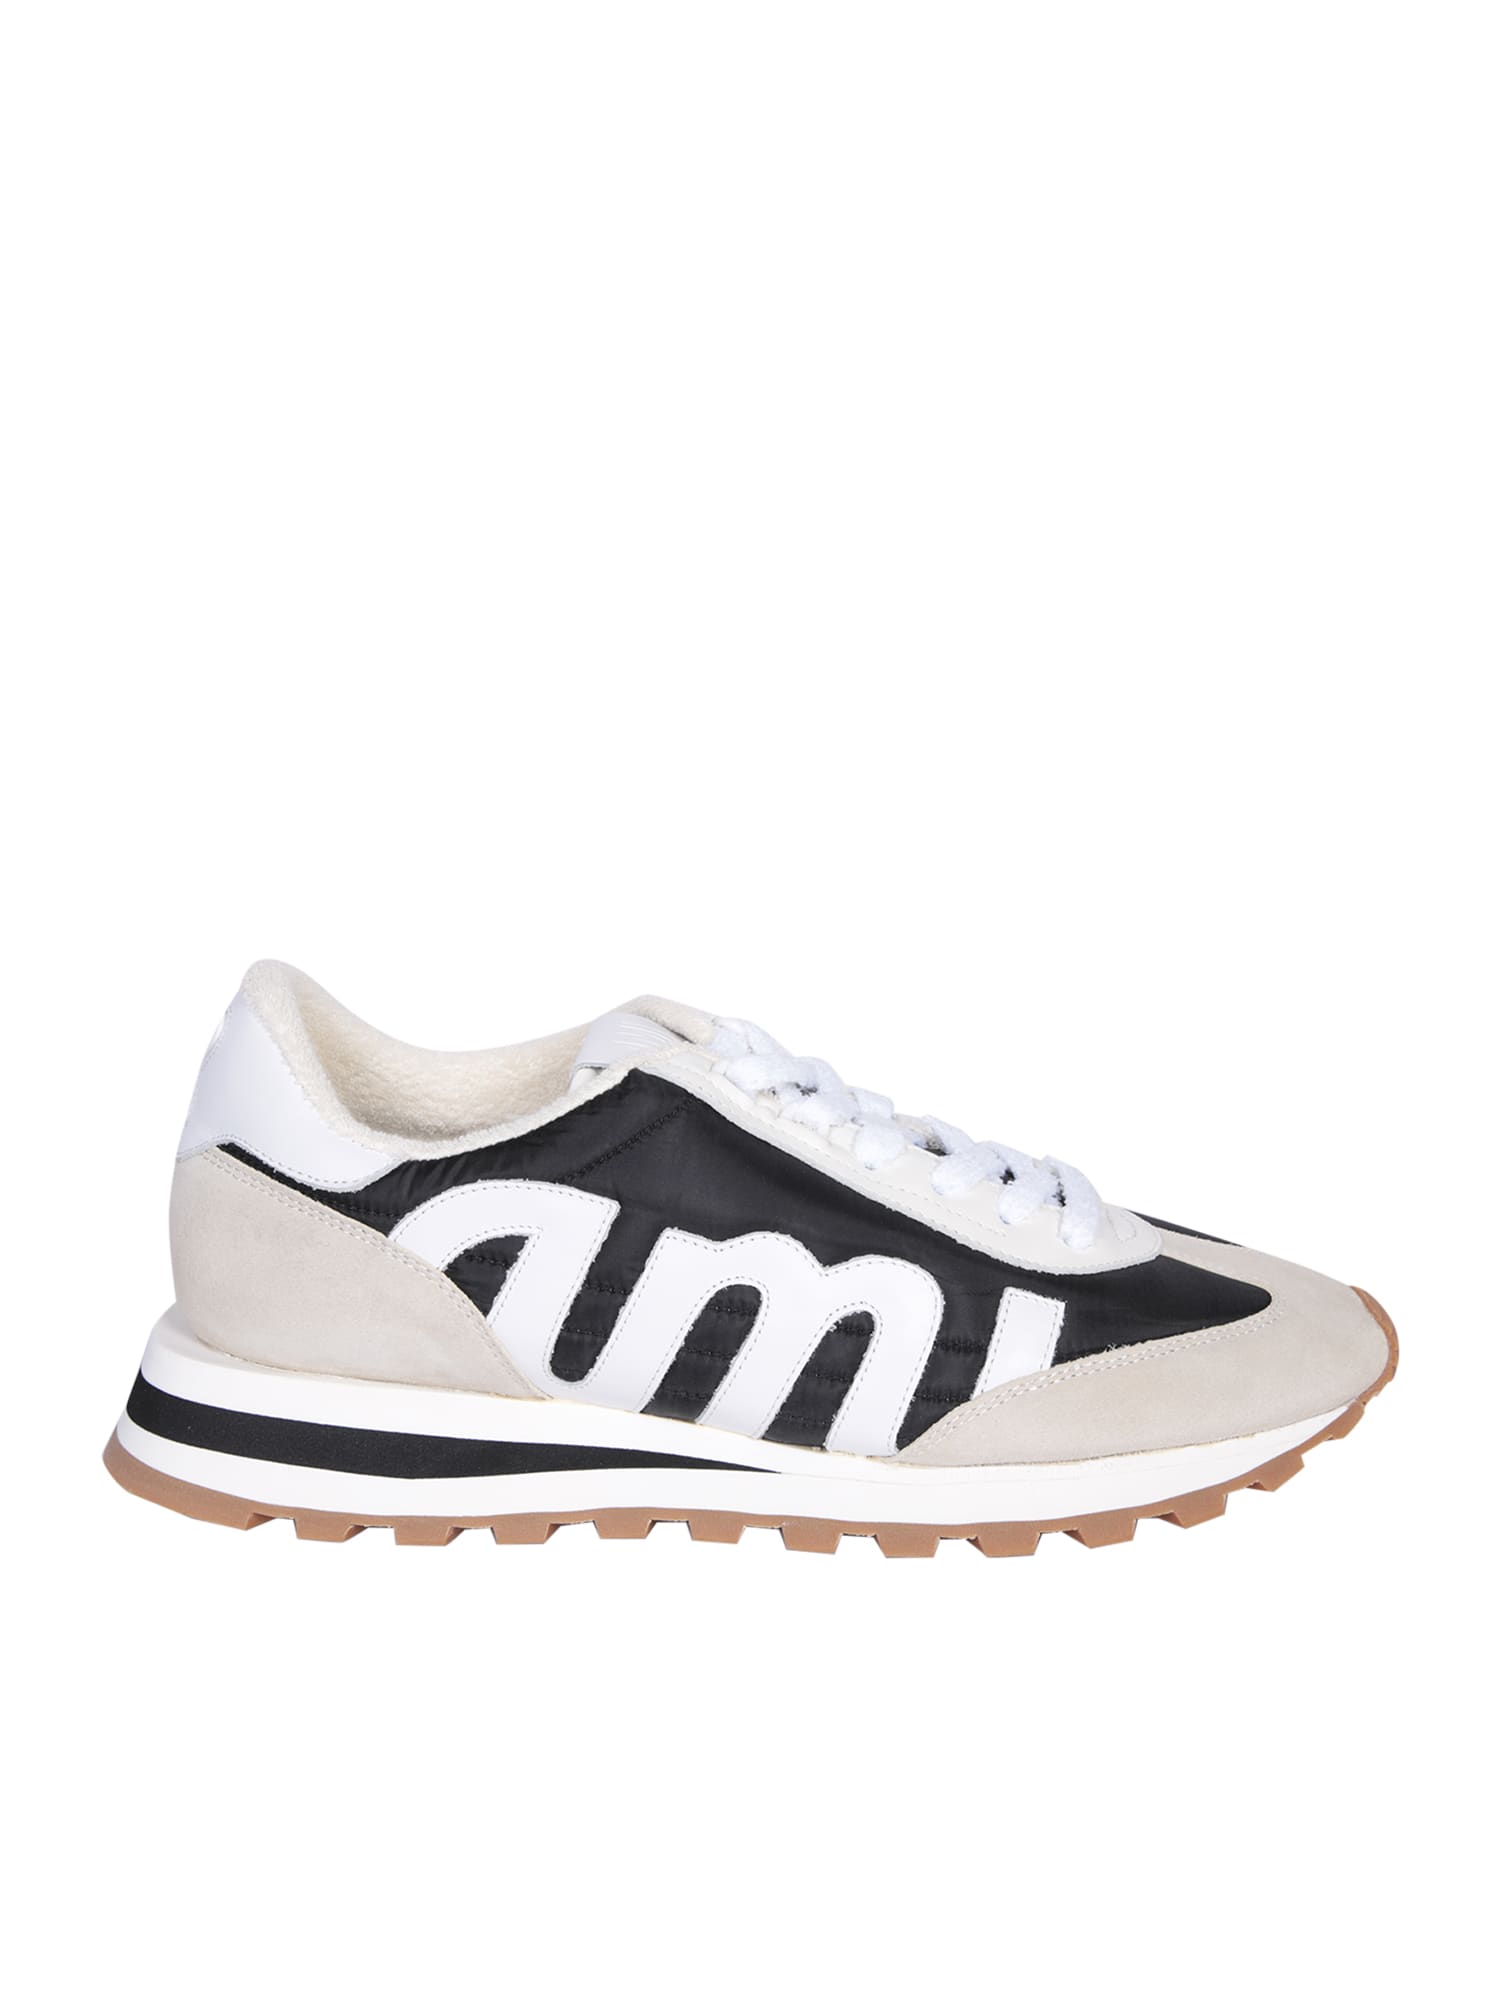 Ami Rush Leather And Canvas Sneakers In Black And Ivory